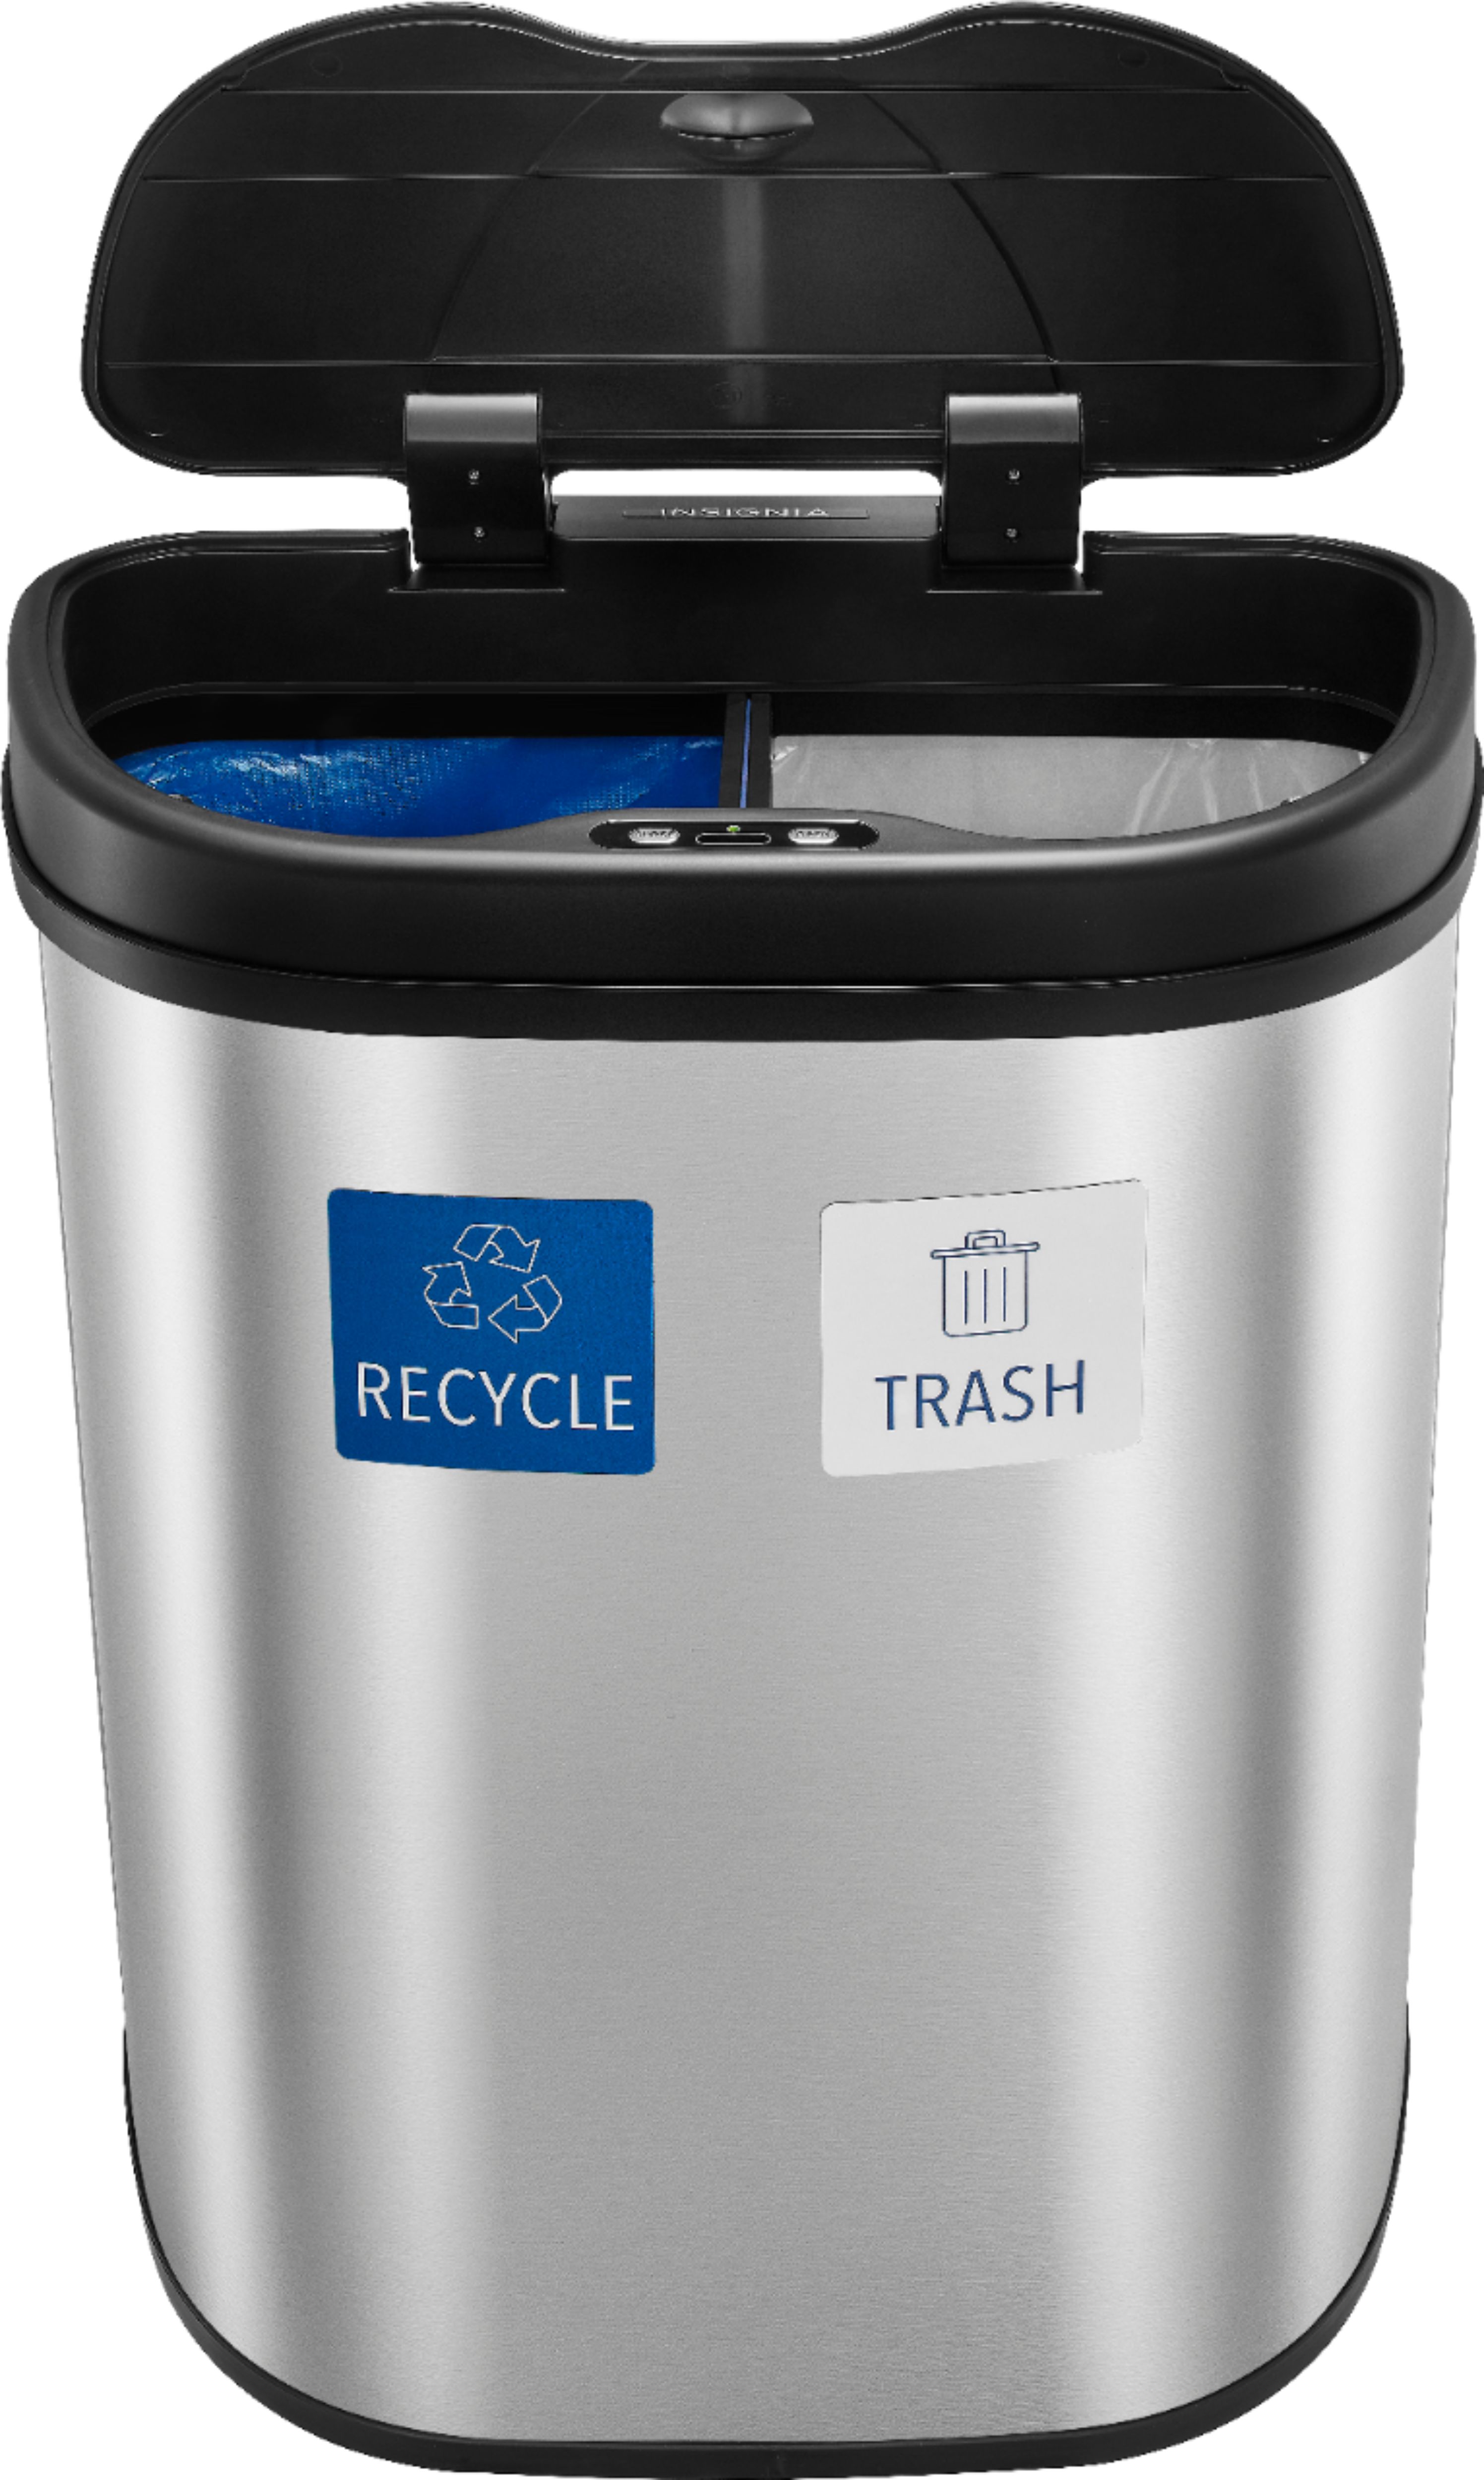 Tall Garbage Cans - Best Buy